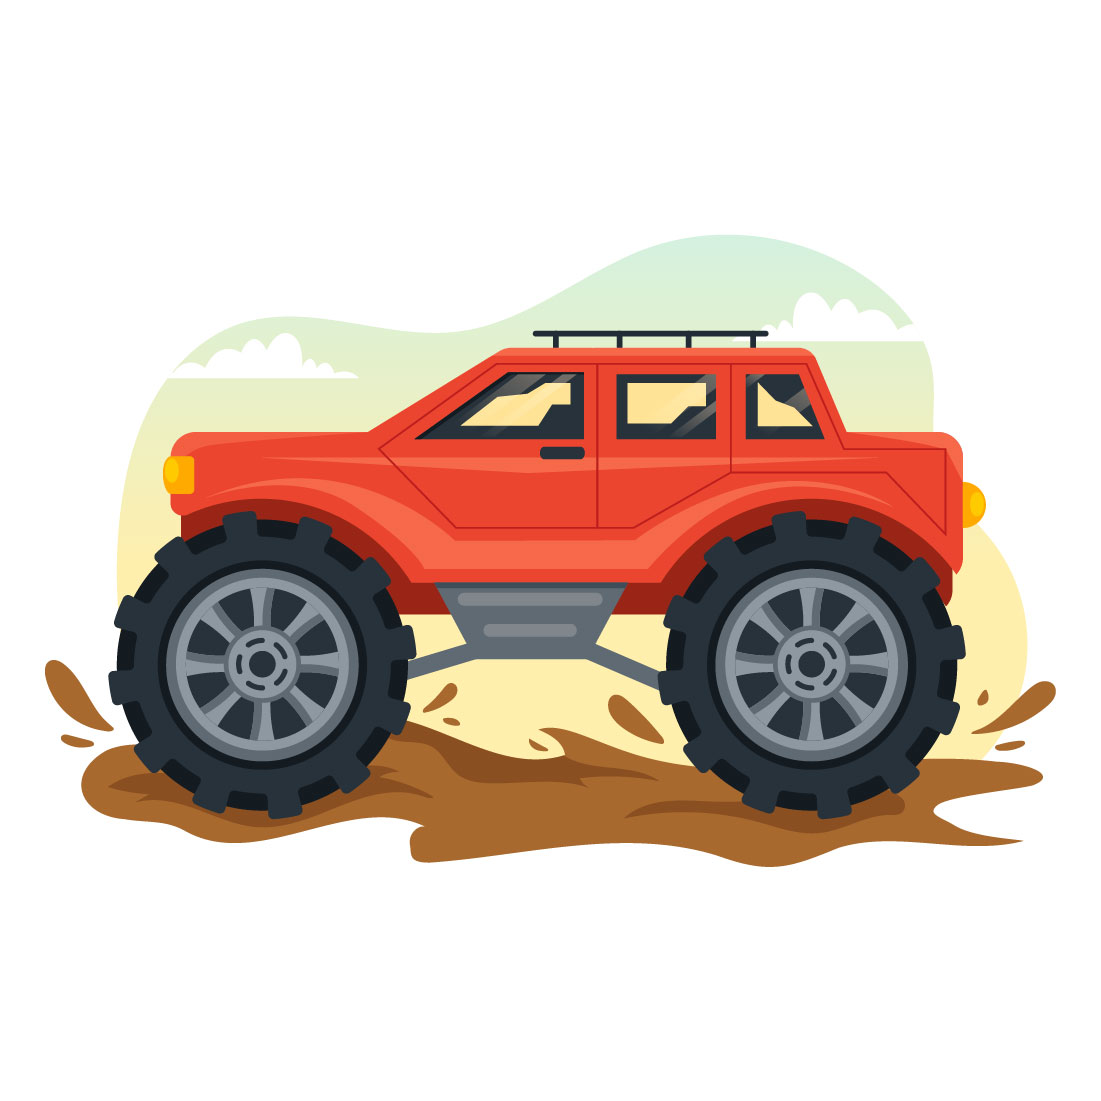 14 Off Road Vehicle Illustration main cover.